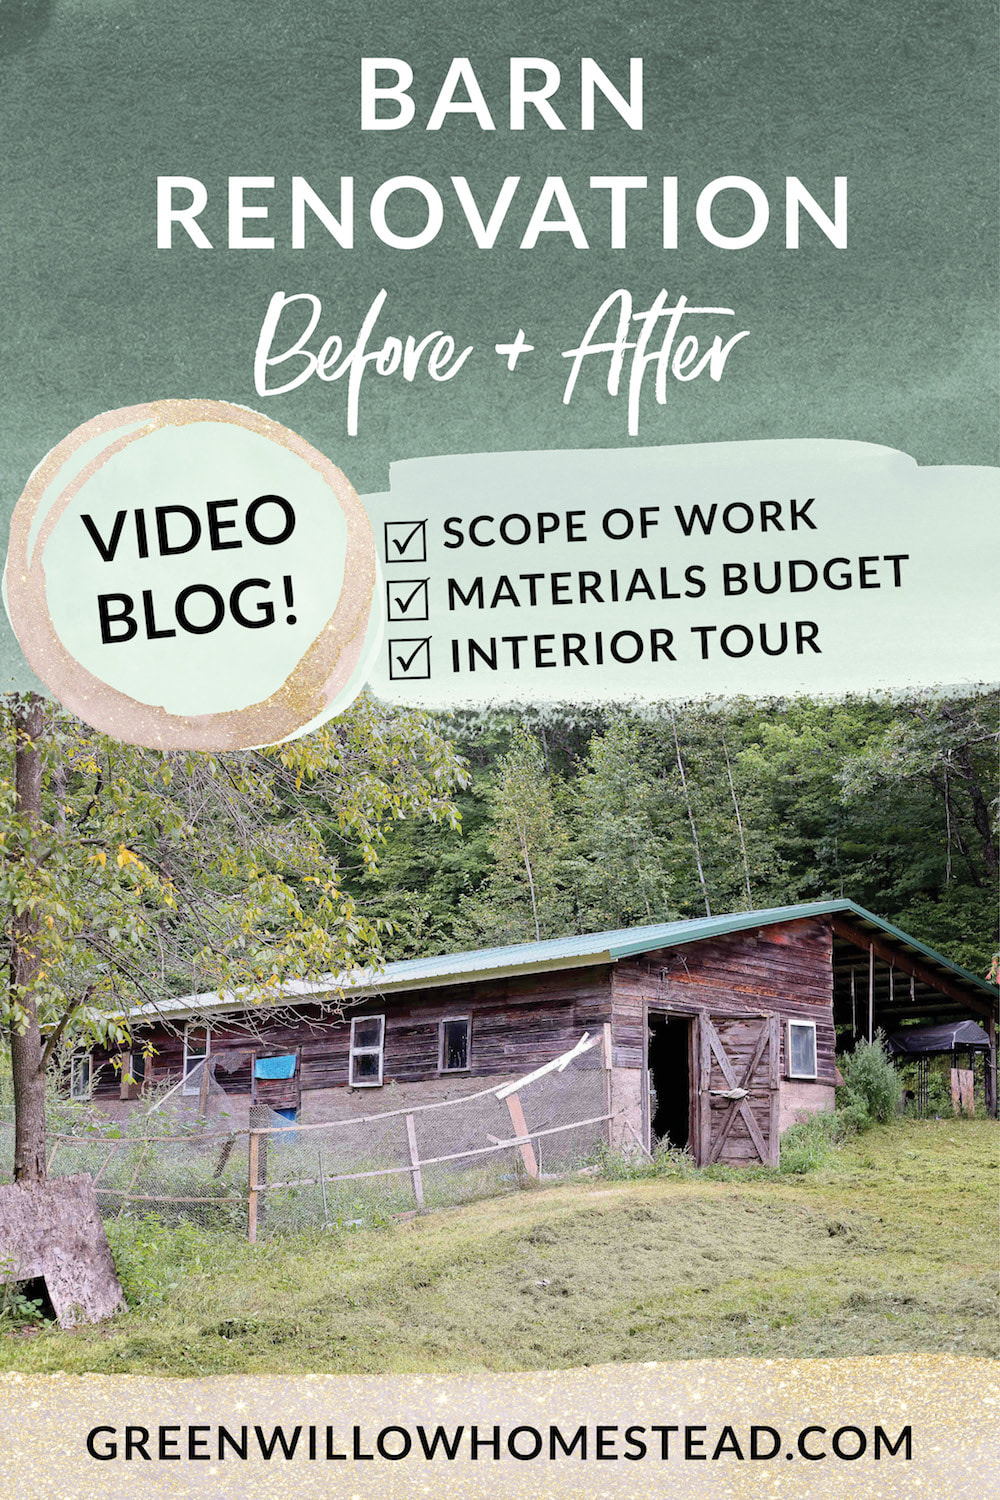 Barn Renovation Before and After - Video Blog